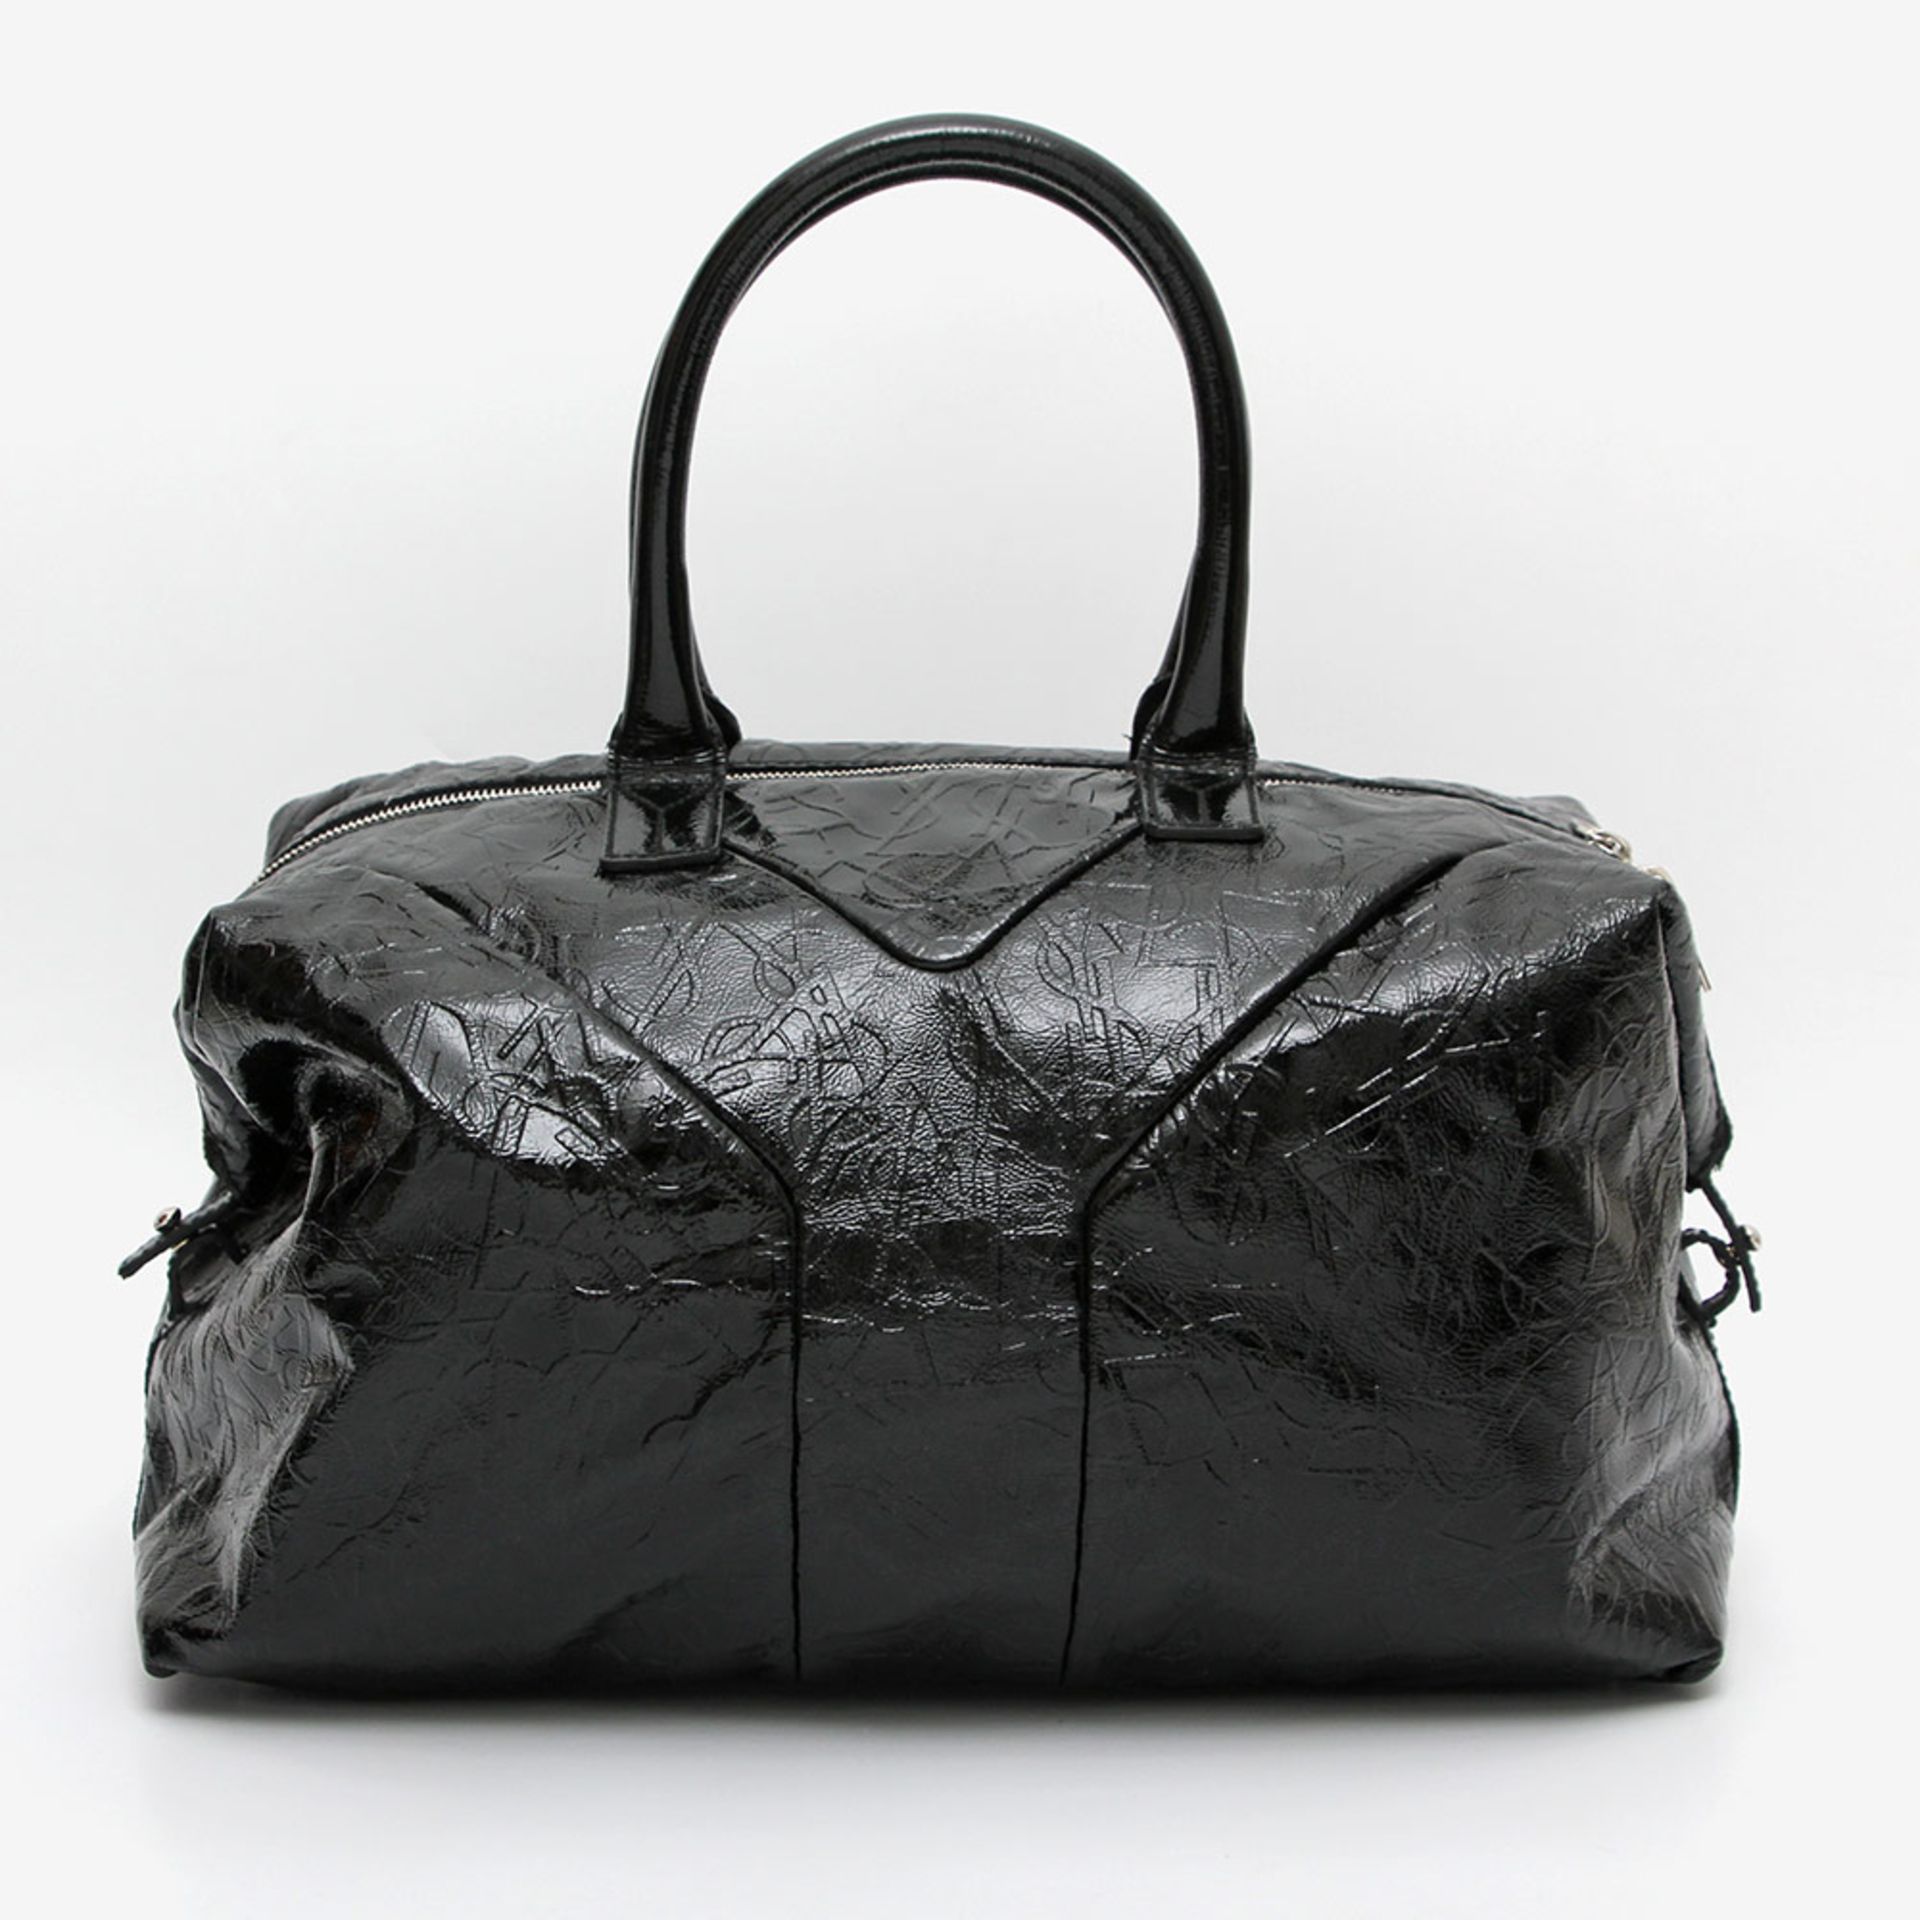 YVES SAINT LAURENT extravagante Lack-Citybag. SEHR SCHICKES MODELL!! NP ca.  980,-. Querformatige